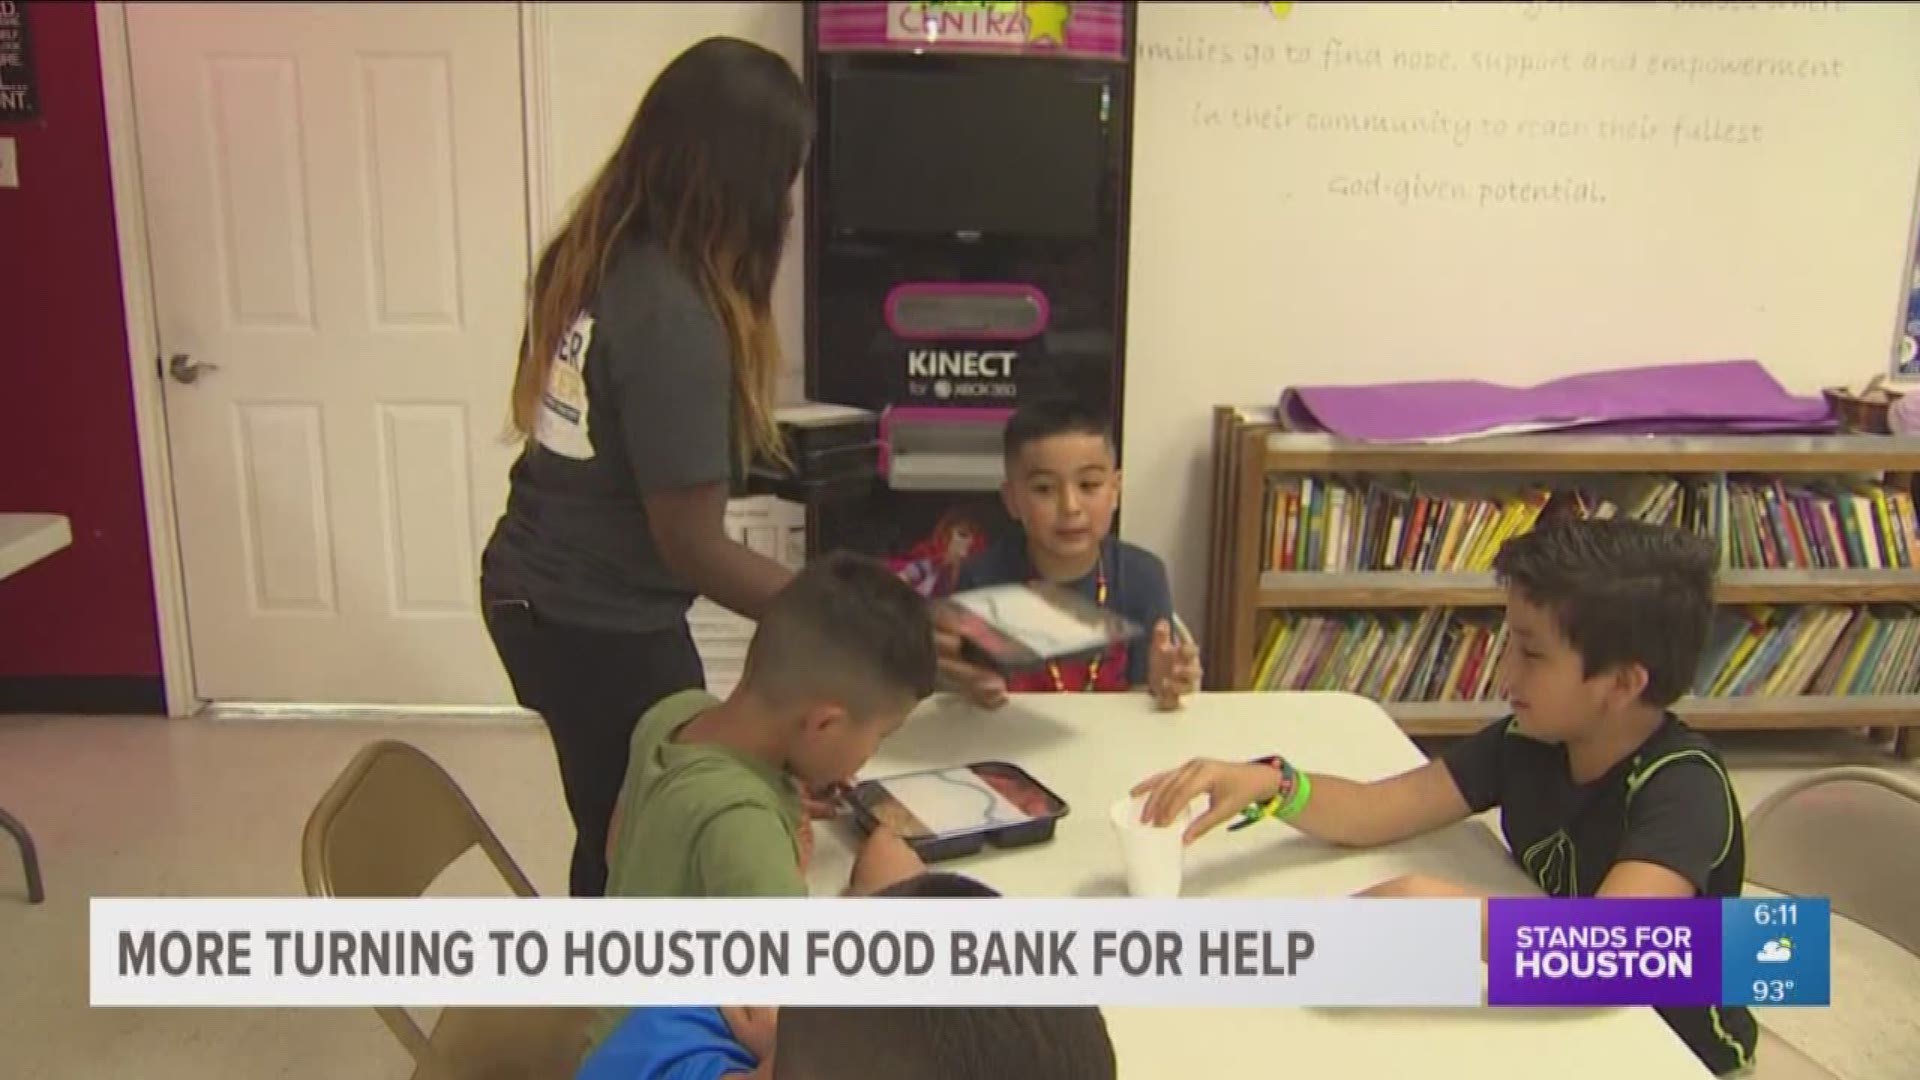 The Houston Food Bank says it's serving far many more meals this year, so far than even at its peak last year. It expects to serve 12,000 meals a day come July.